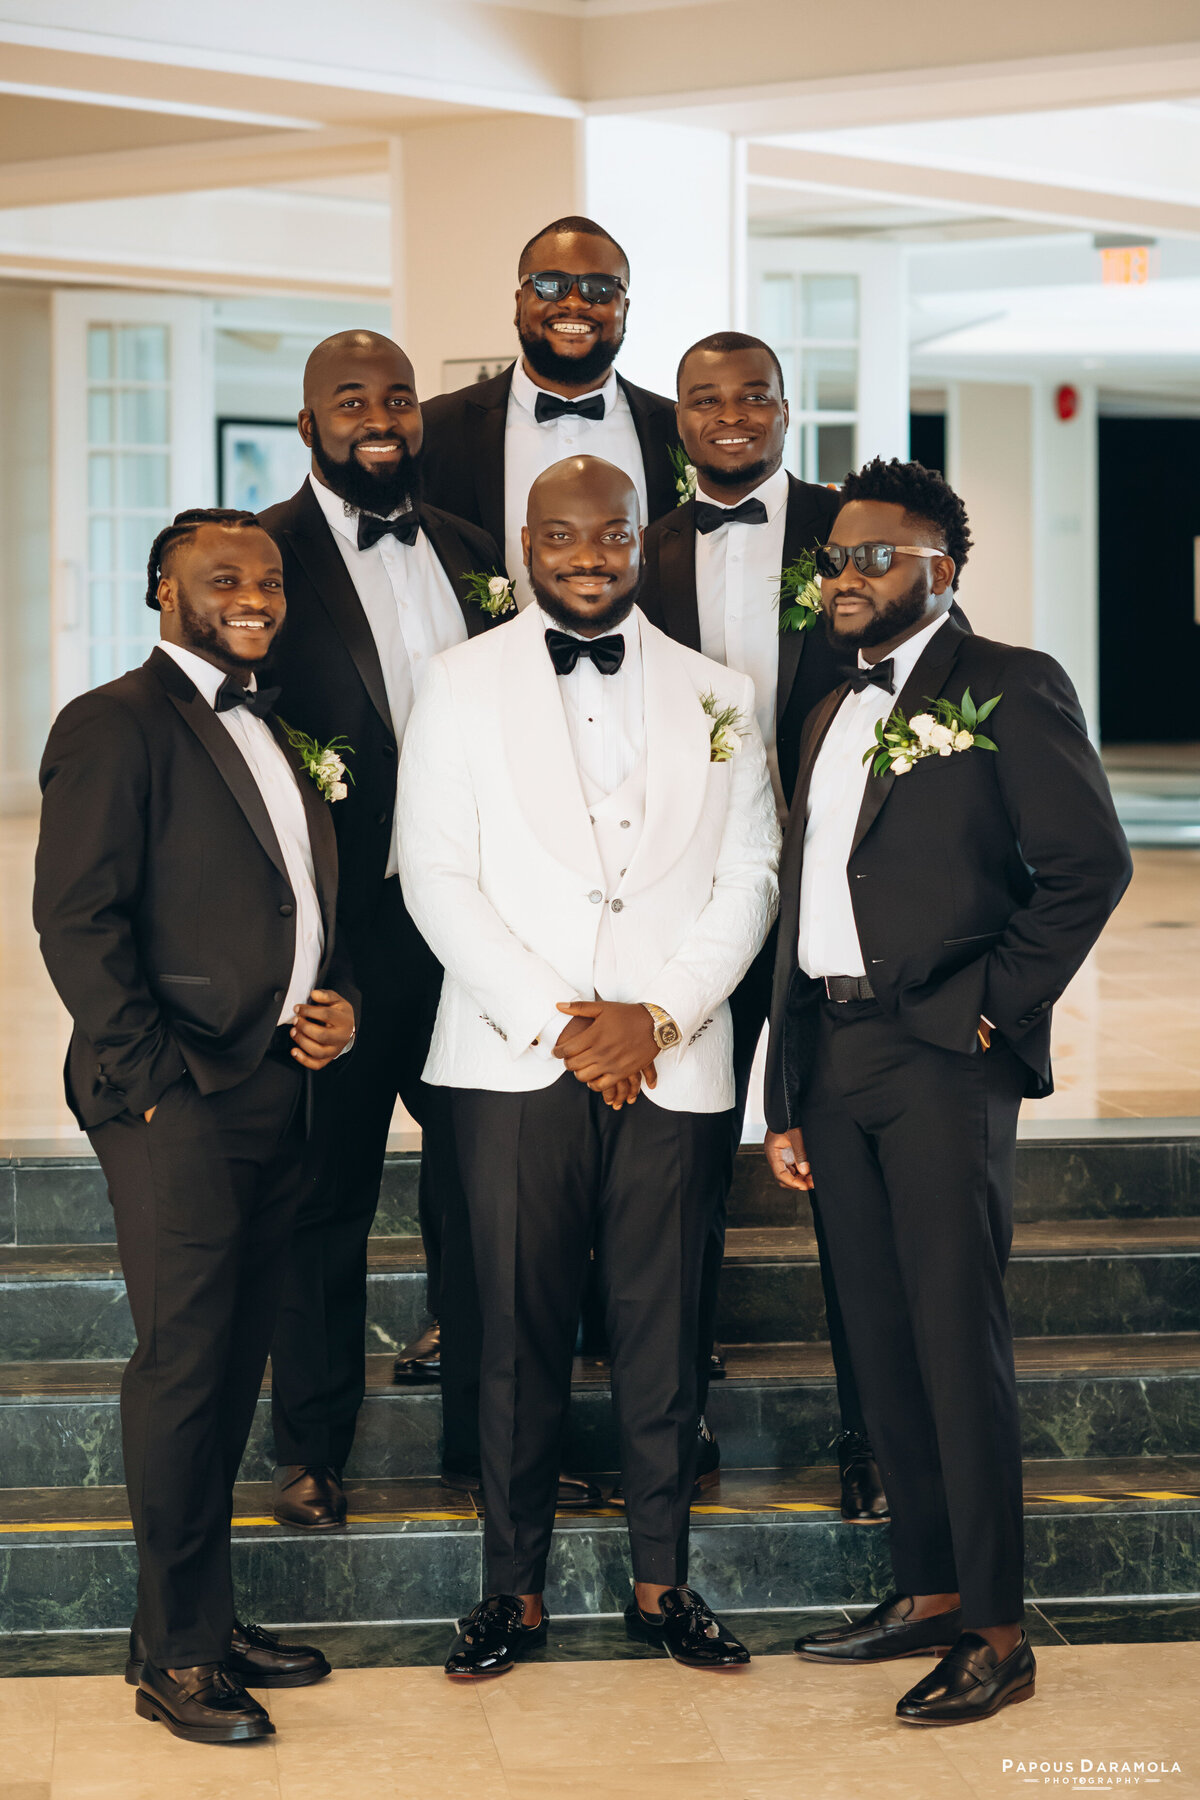 Abigail and Abije Oruka Events Papouse photographer Wedding event planners Toronto planner African Nigerian Eyitayo Dada Dara Ayoola outdoor ceremony floral princess ballgown rolls royce groom suit potraits  paradise banquet hall vaughn 11